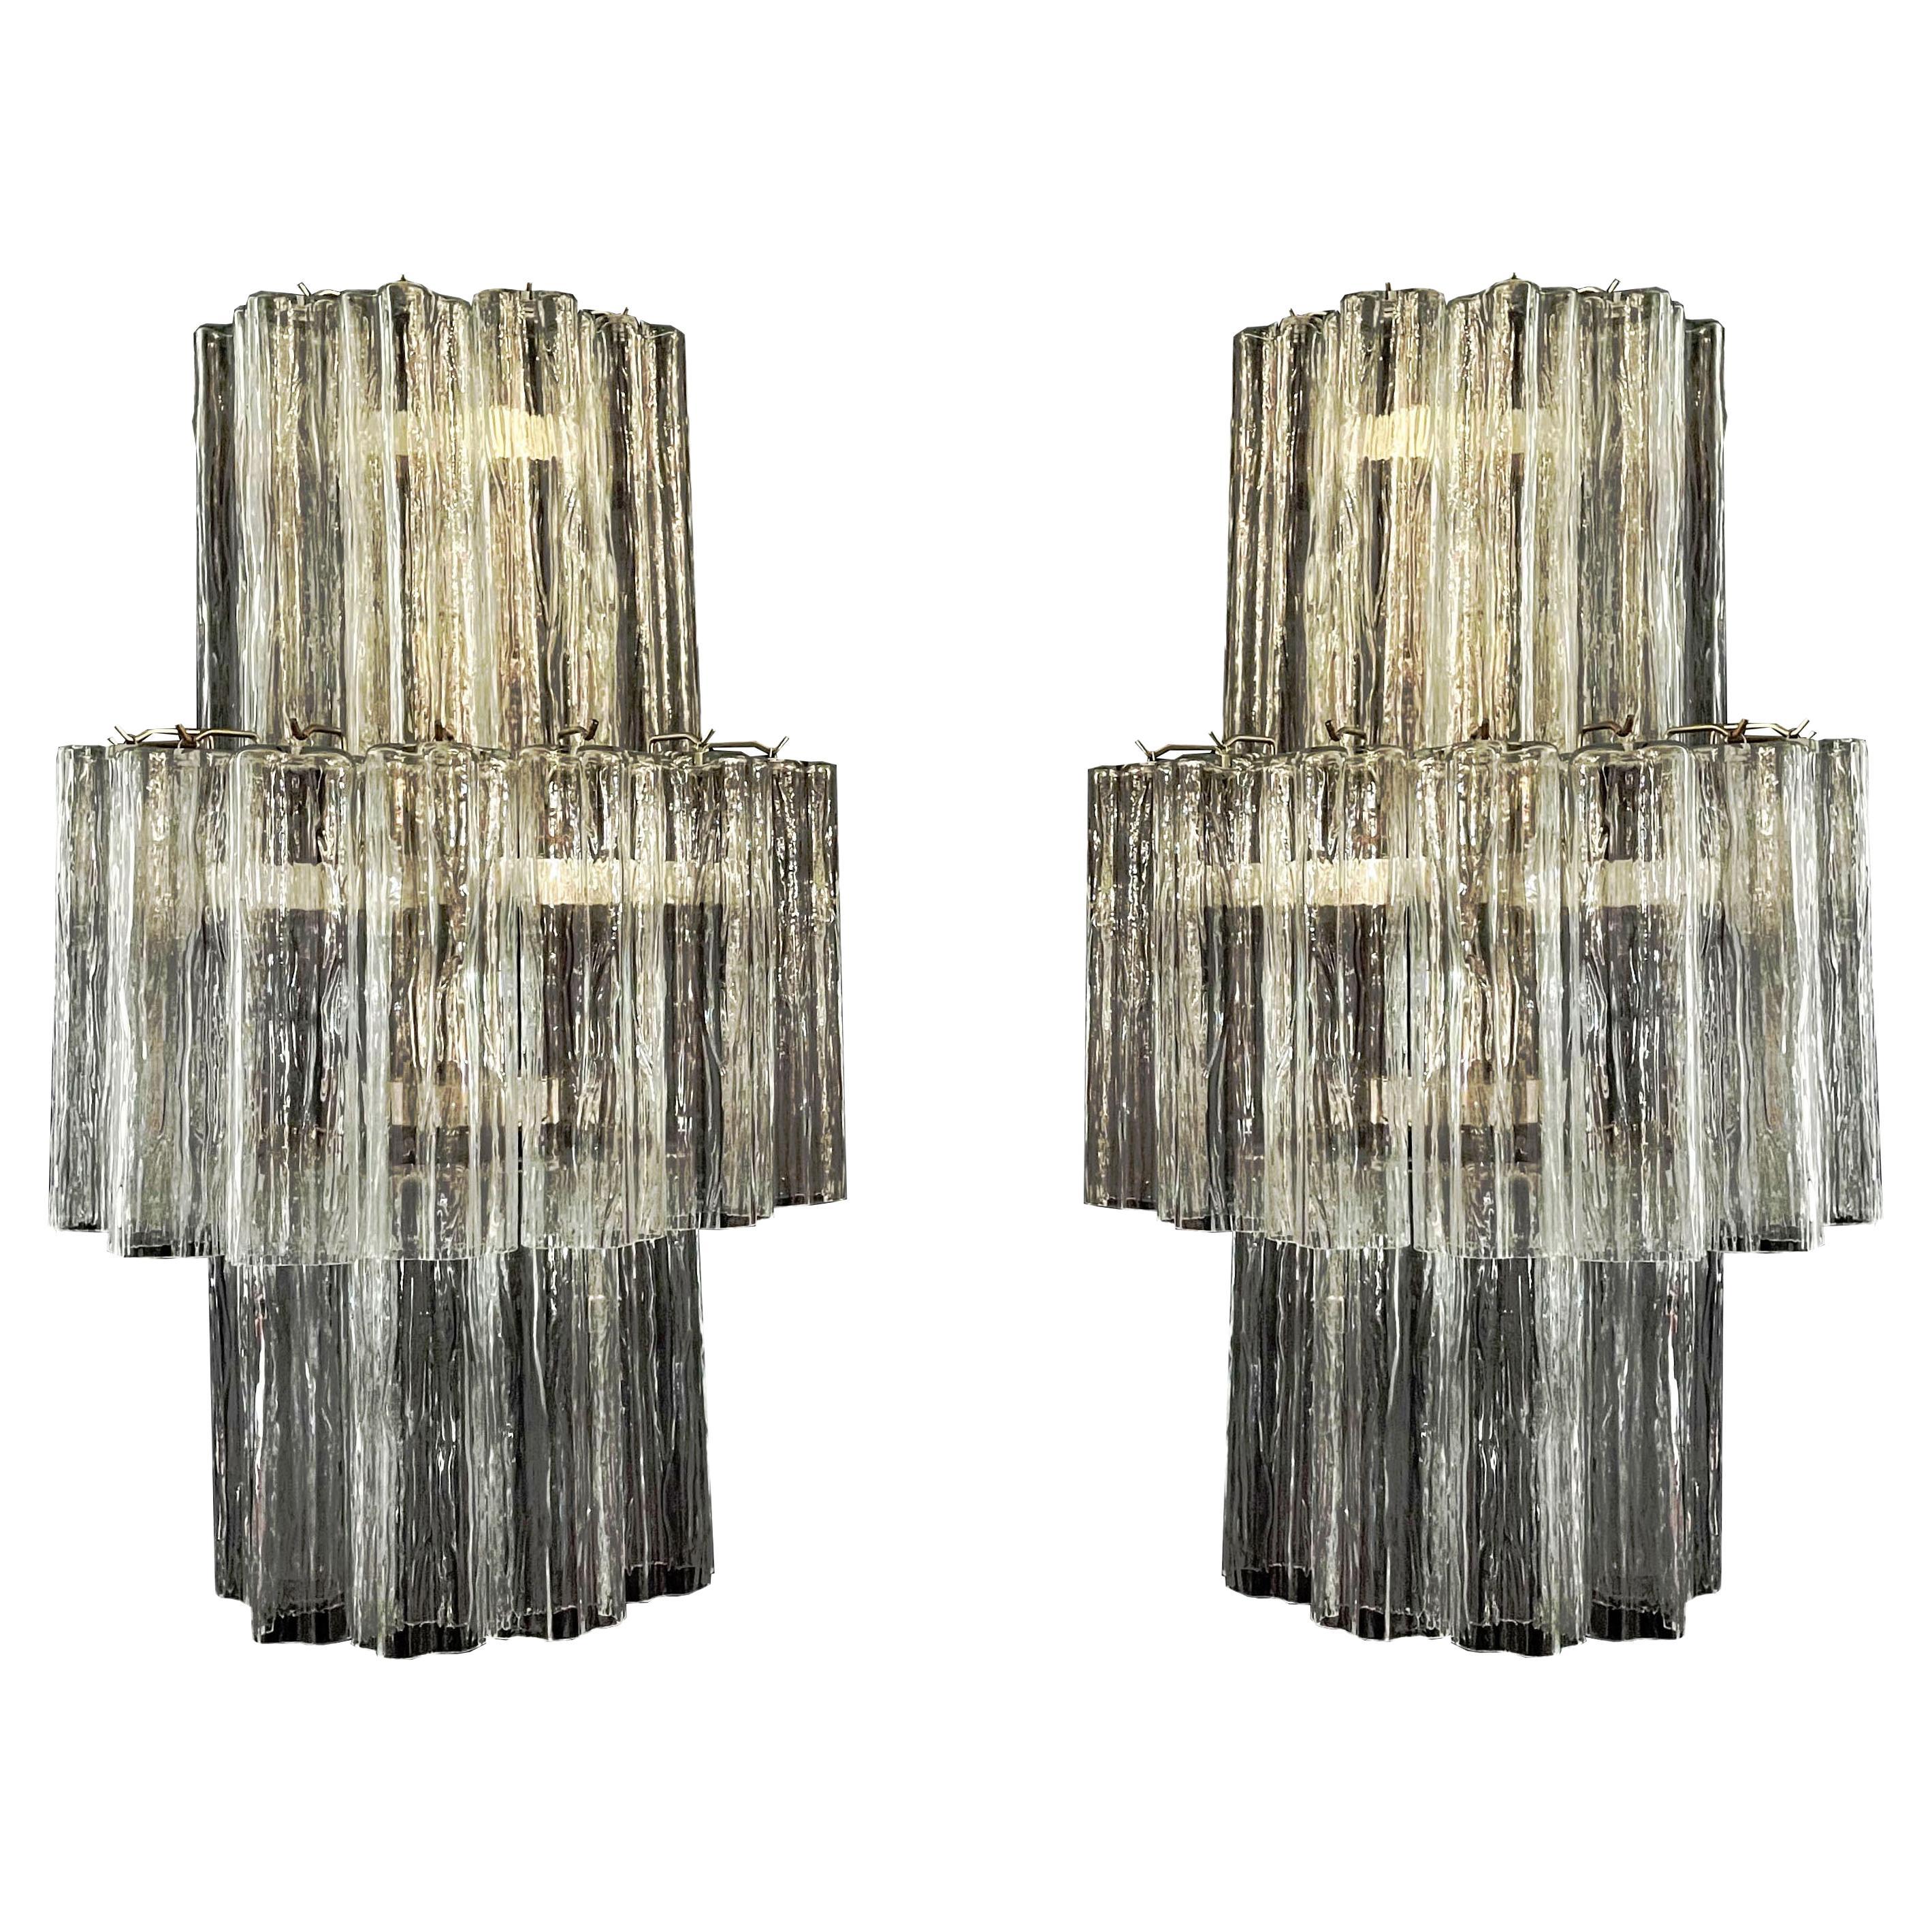 Fantastic Pair of Murano Glass Tube Wall Sconces, 18 Clear Glass Tube